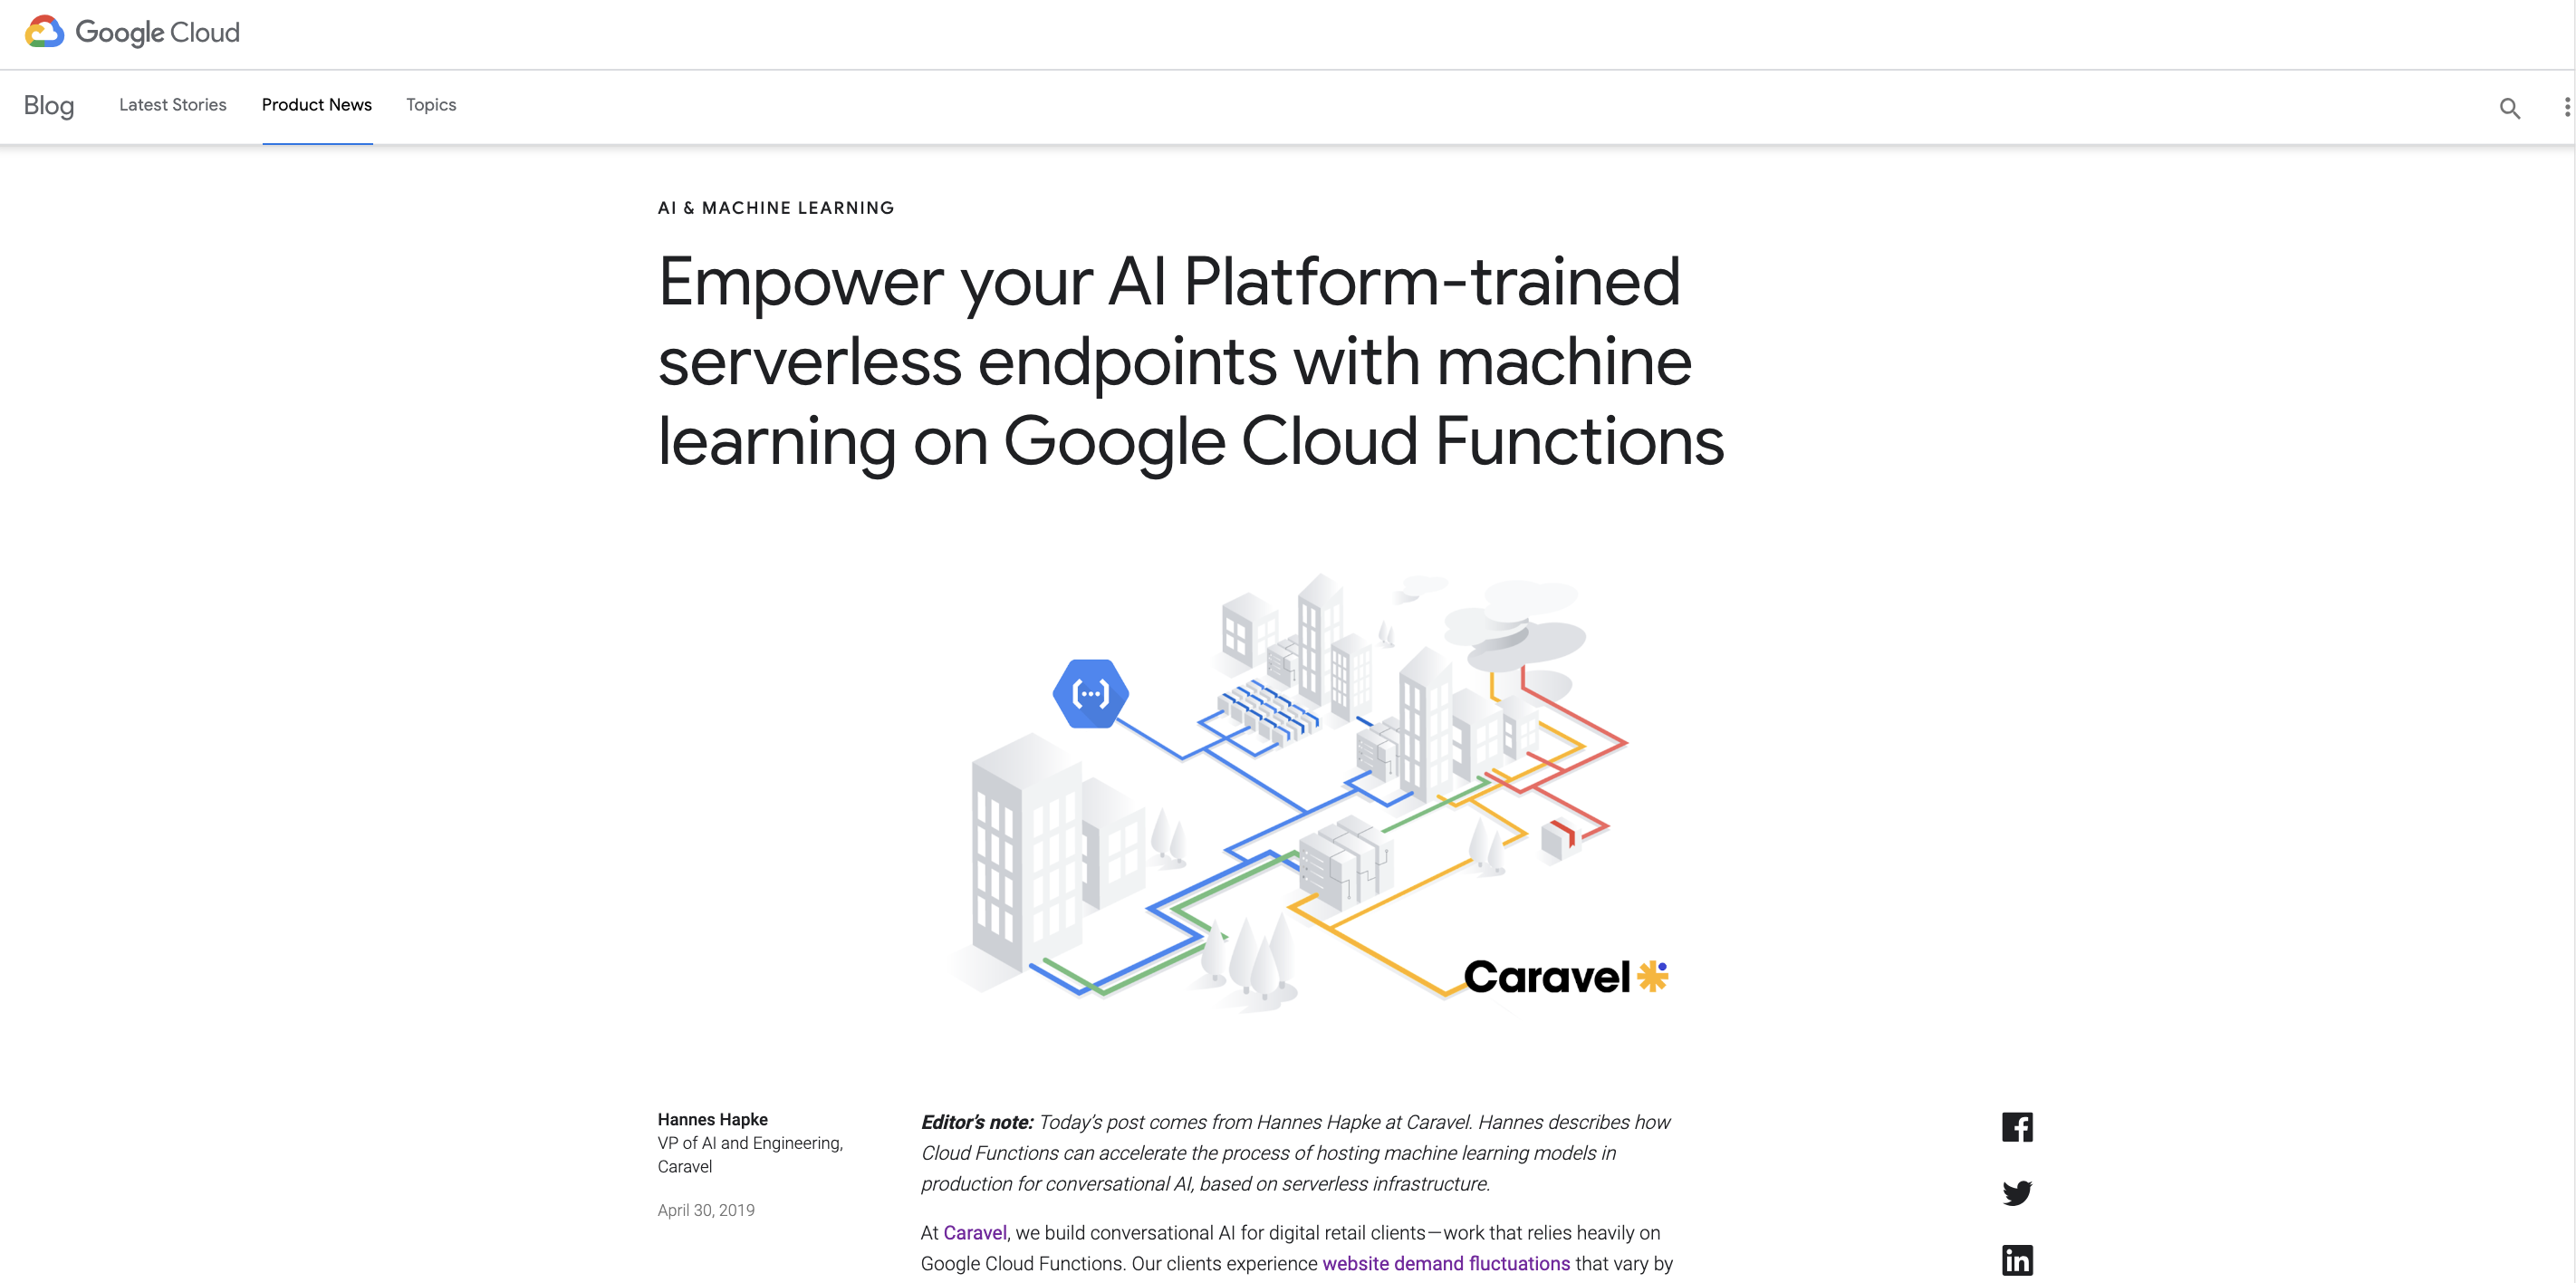 Empower your AI Platform-trained serverless endpoints with machine learning on Google Cloud Functions